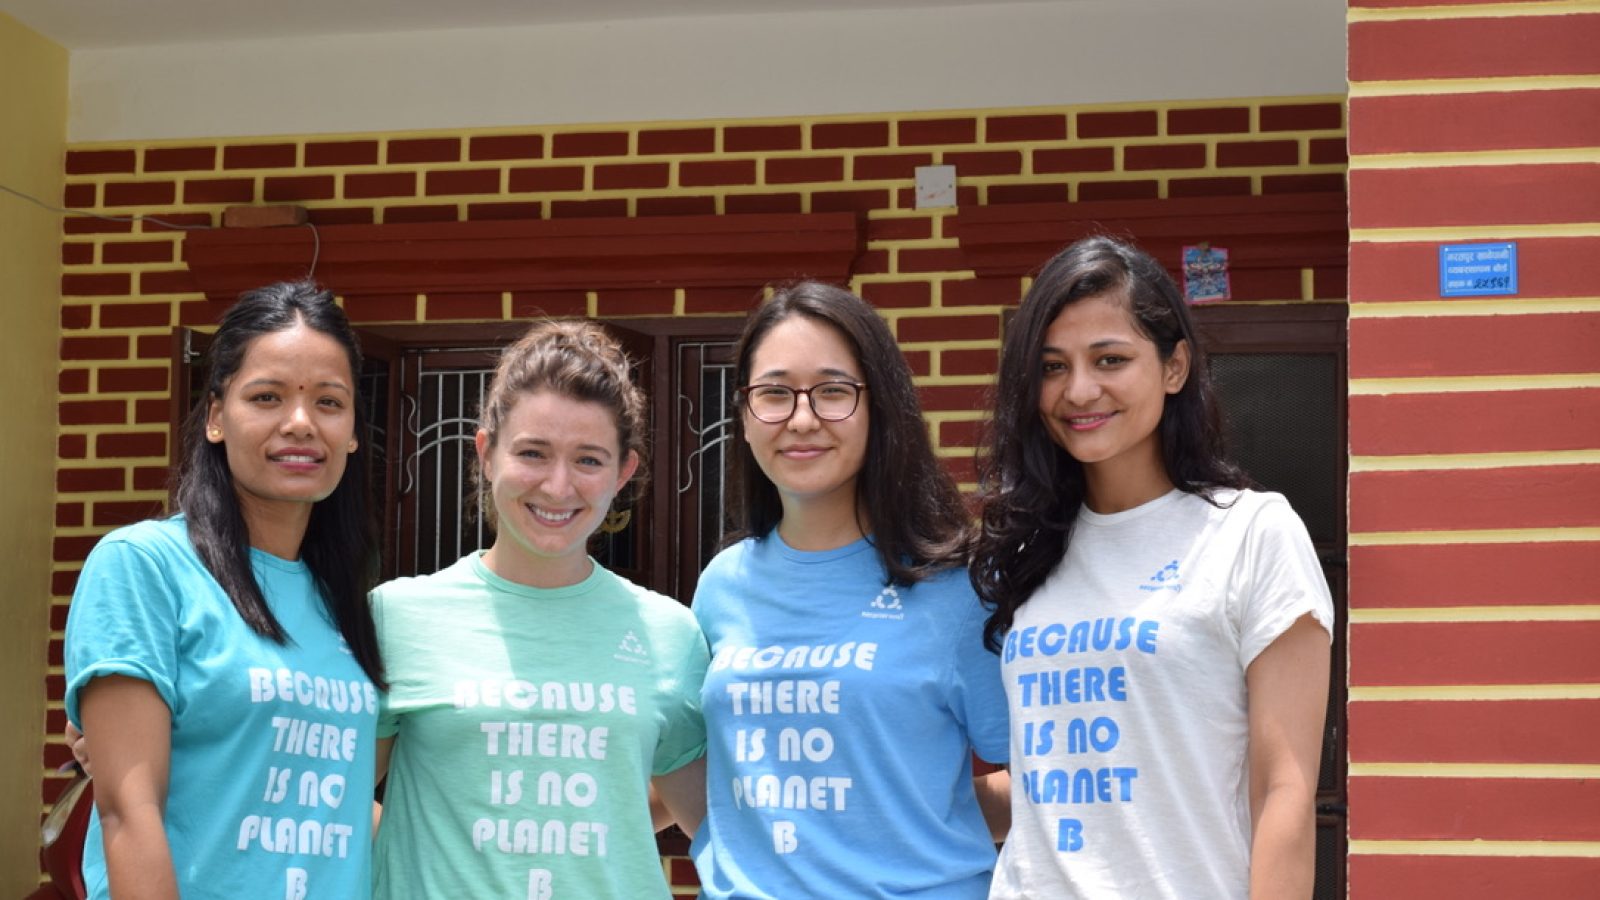 Four women standing together wearing shirts that say 